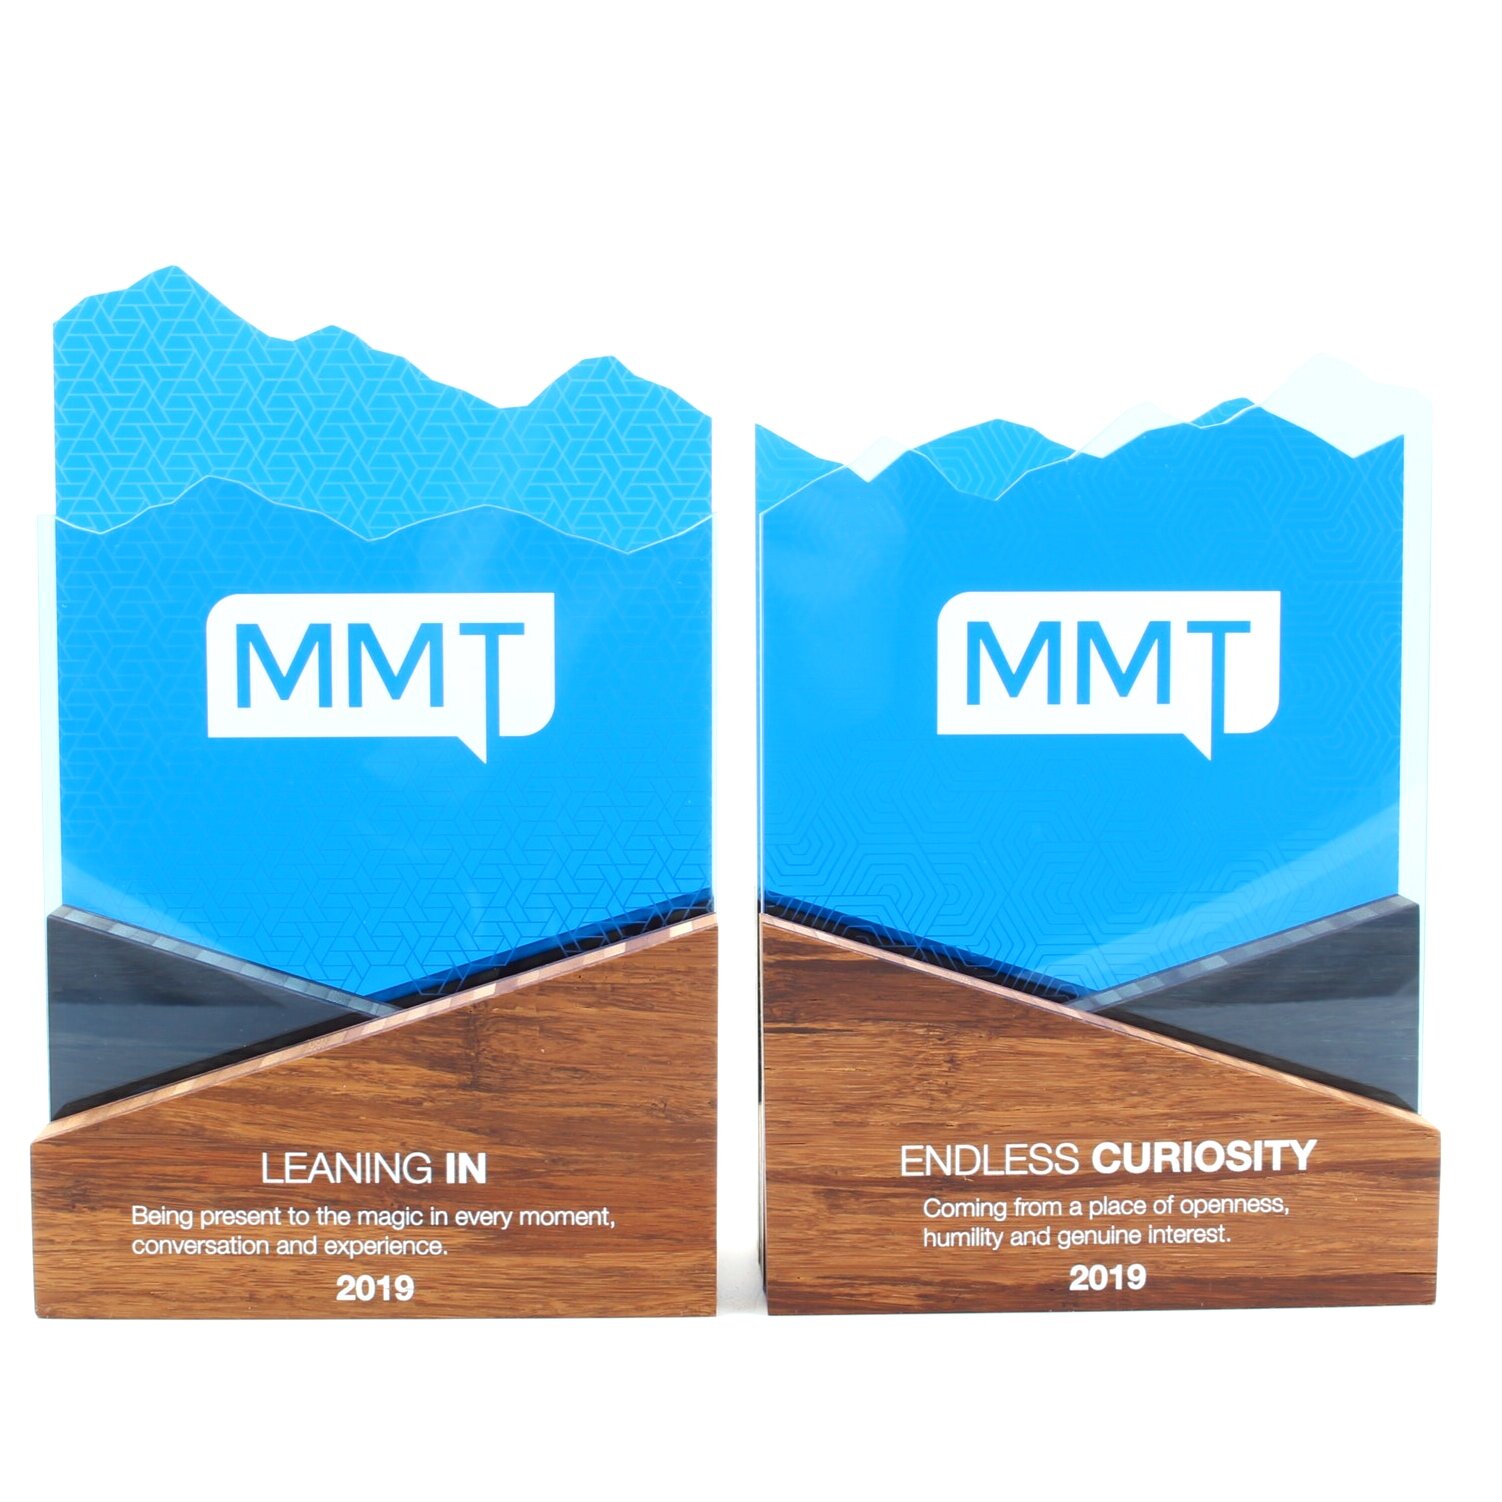 MMT+core+values+trophies+awards+yearly+staff+appreciation+4.jpg